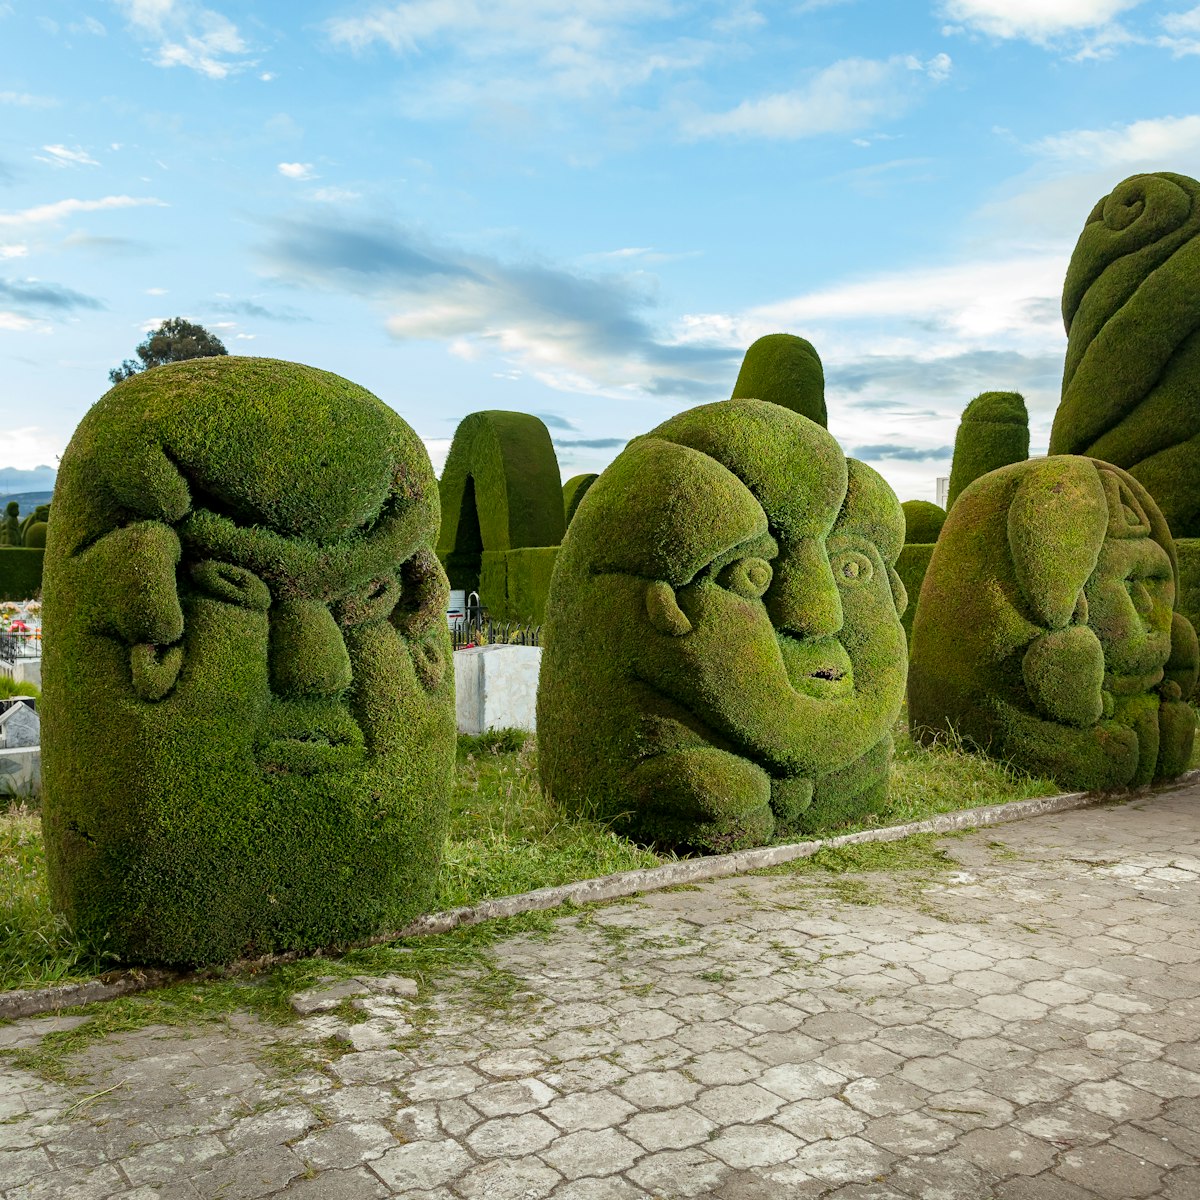 Green sculptures, carved in cypress bushes, adorn the corridors of the Tulcán Cemetery.